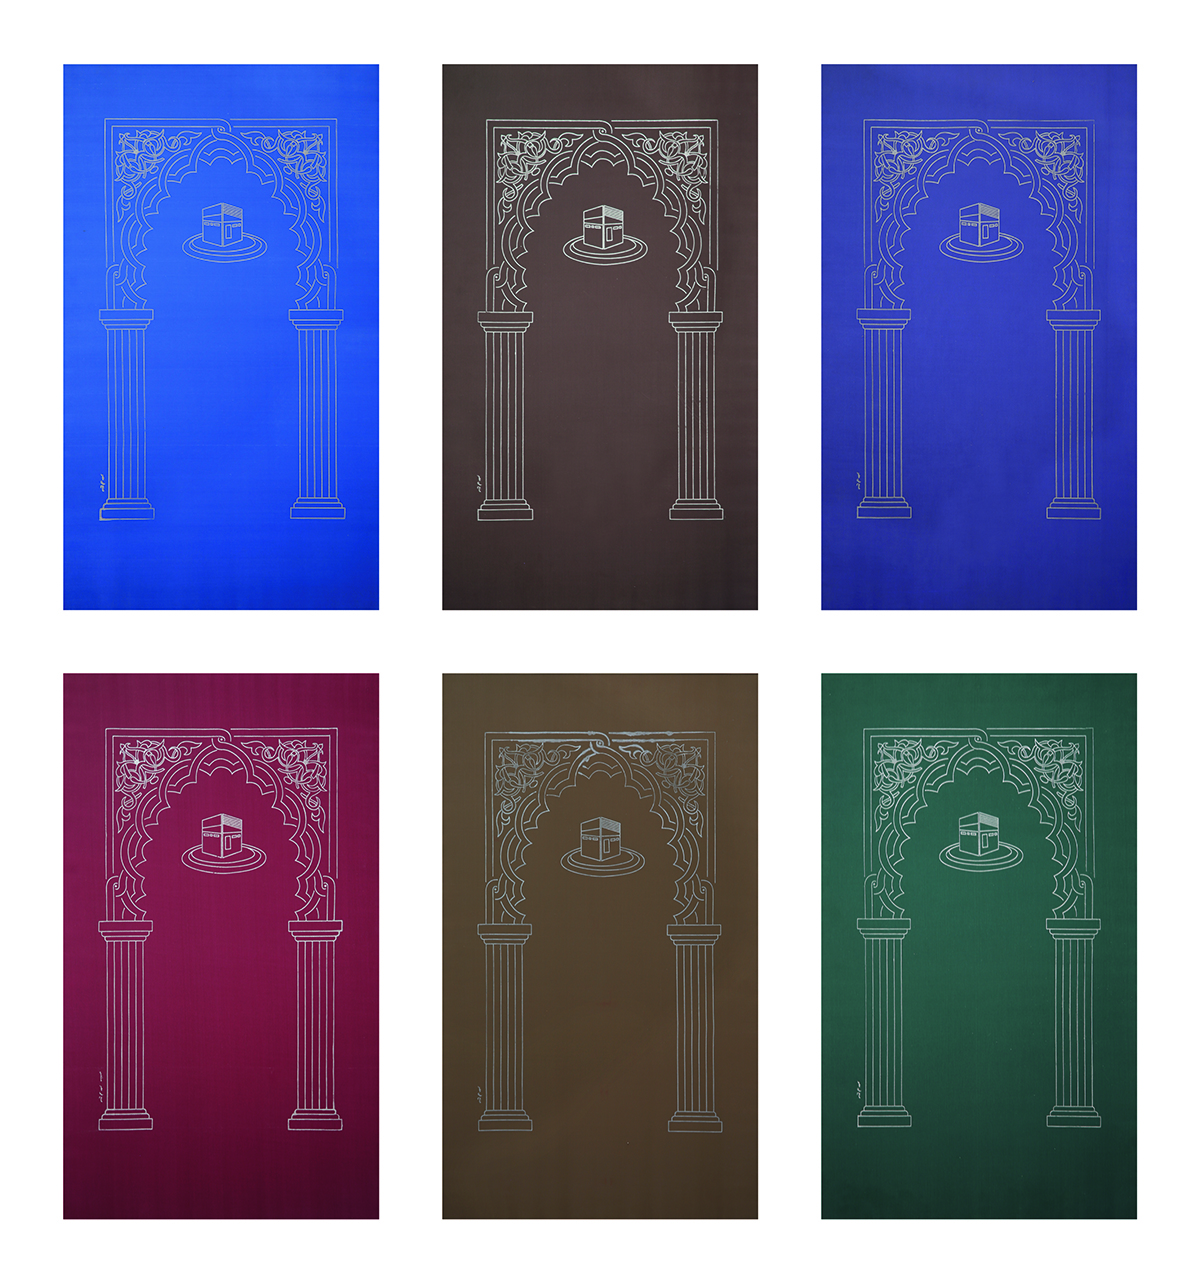 six arches drawn on rectangles in purple, blue, red, green and brown